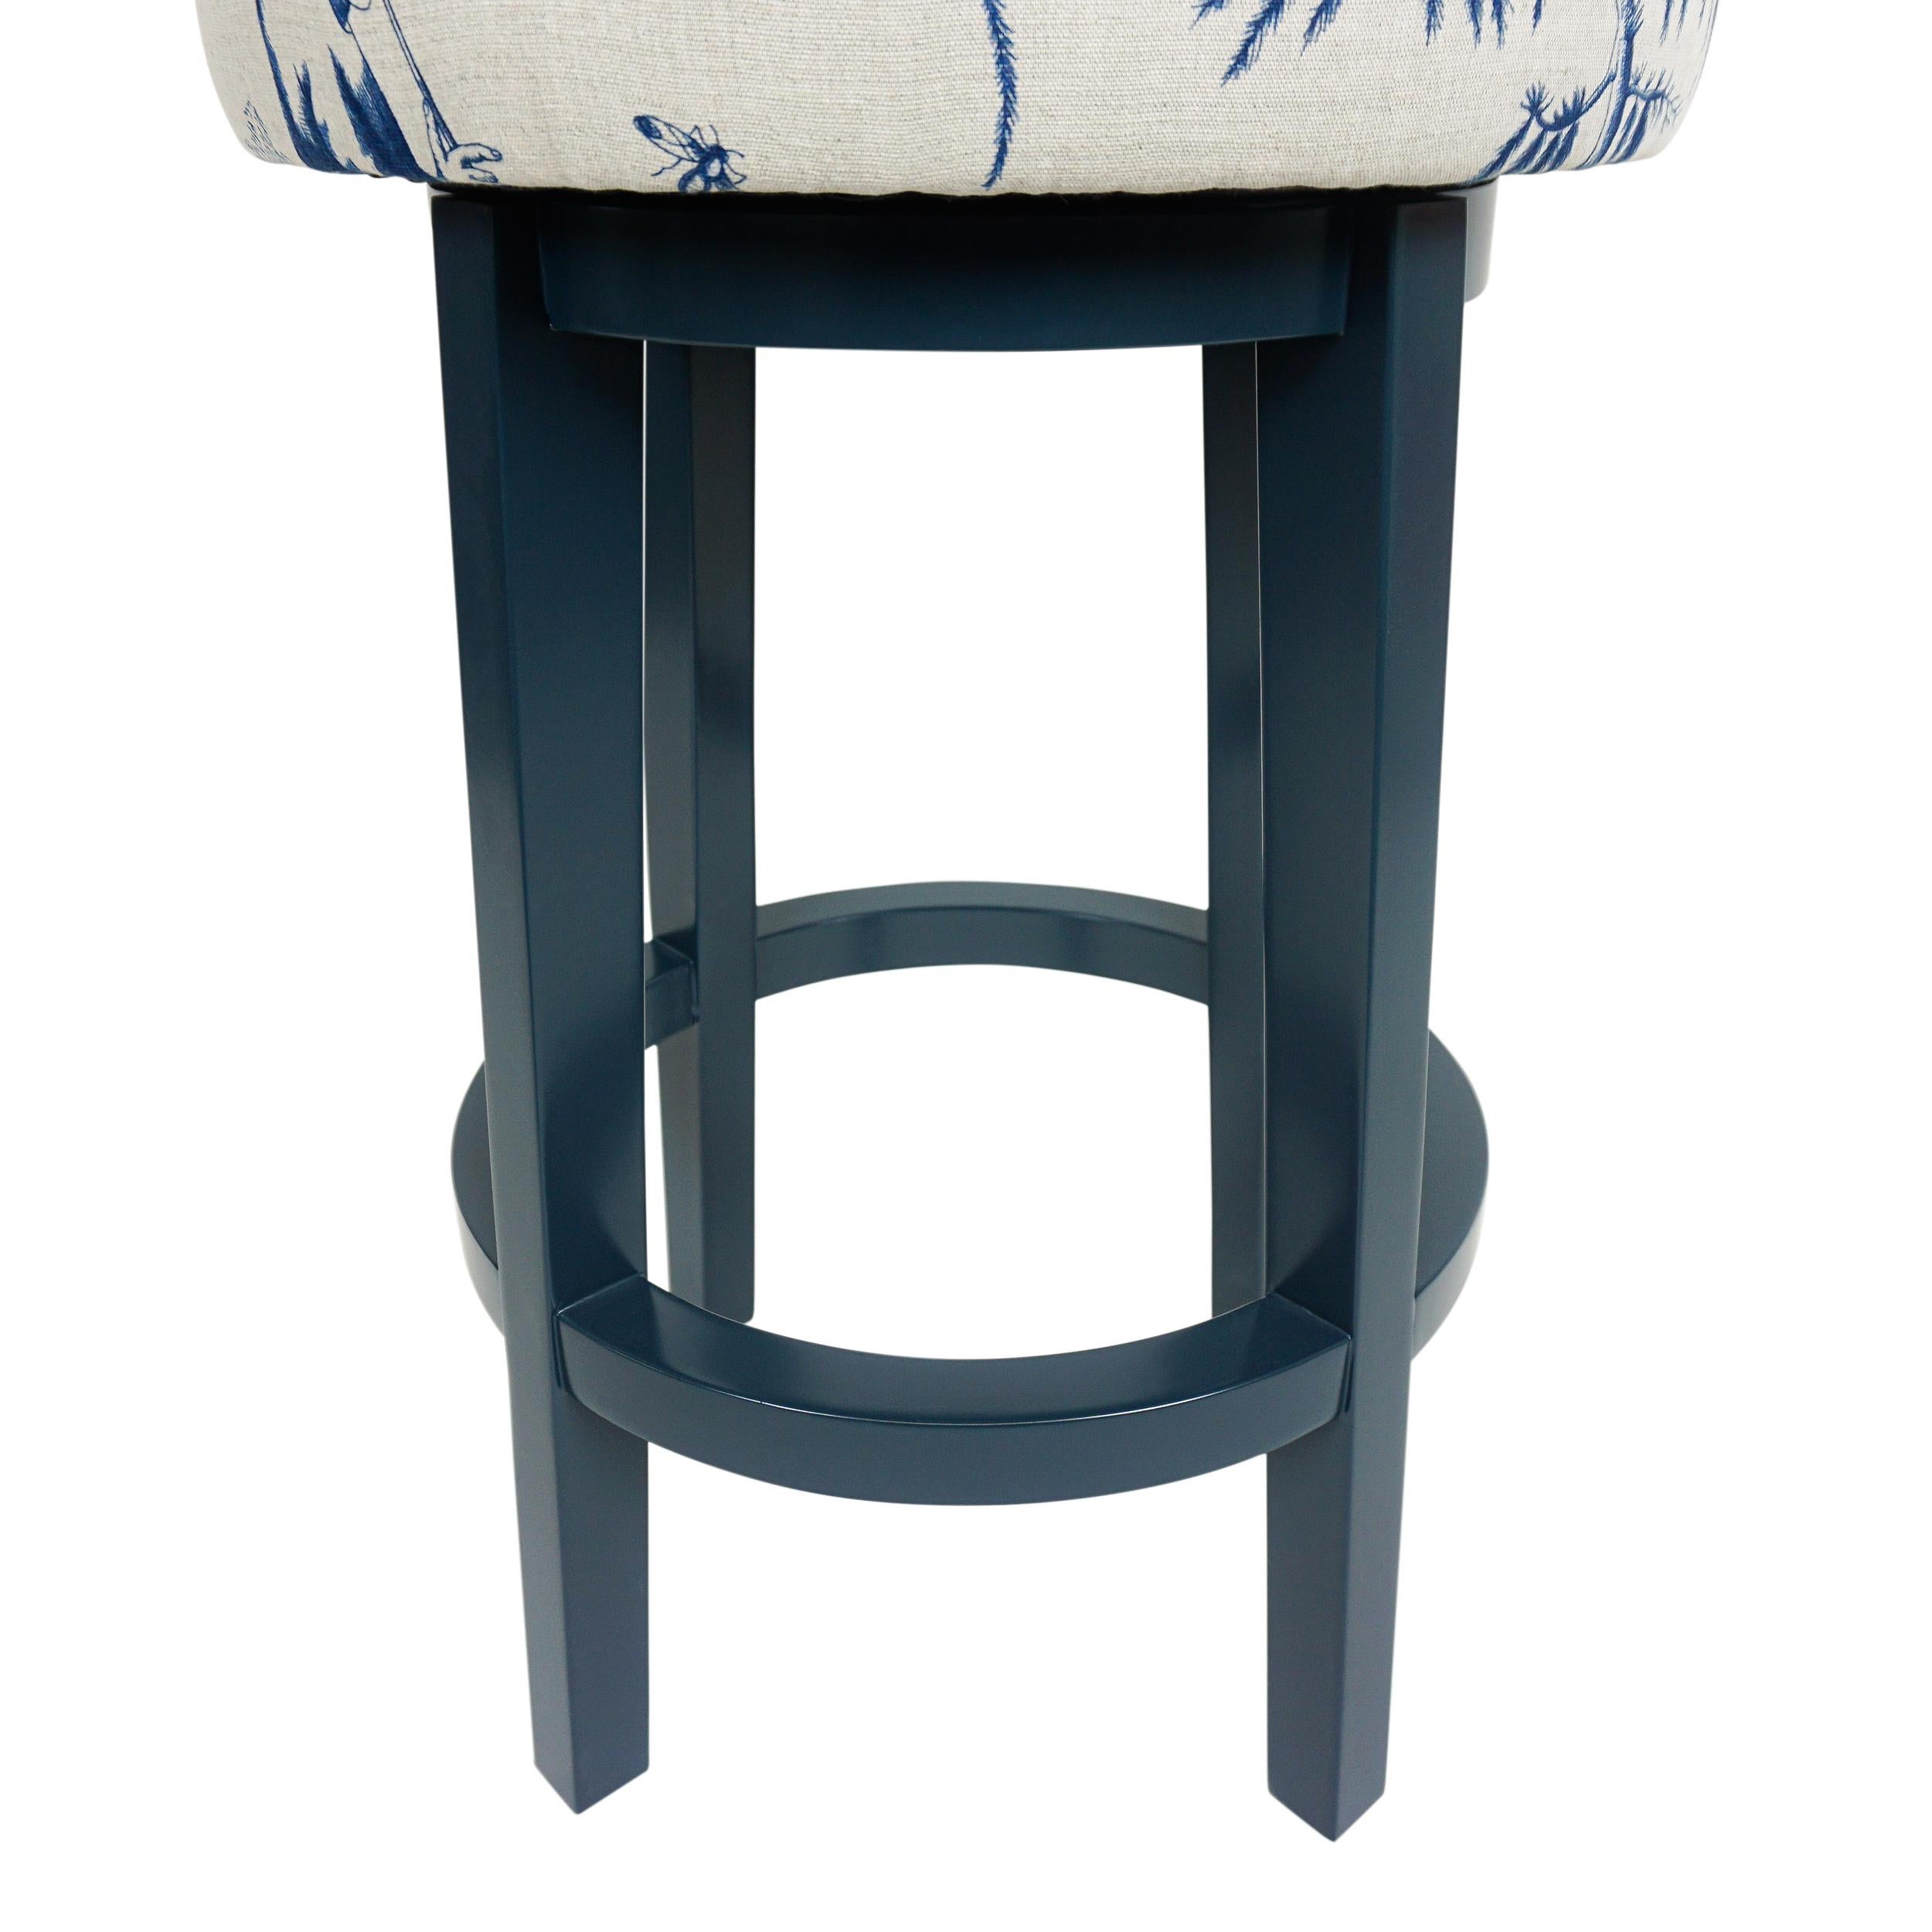 Modern Donut Shaped Bar Stool with Japanese Inspired Shengyou Toile In New Condition For Sale In Greenwich, CT